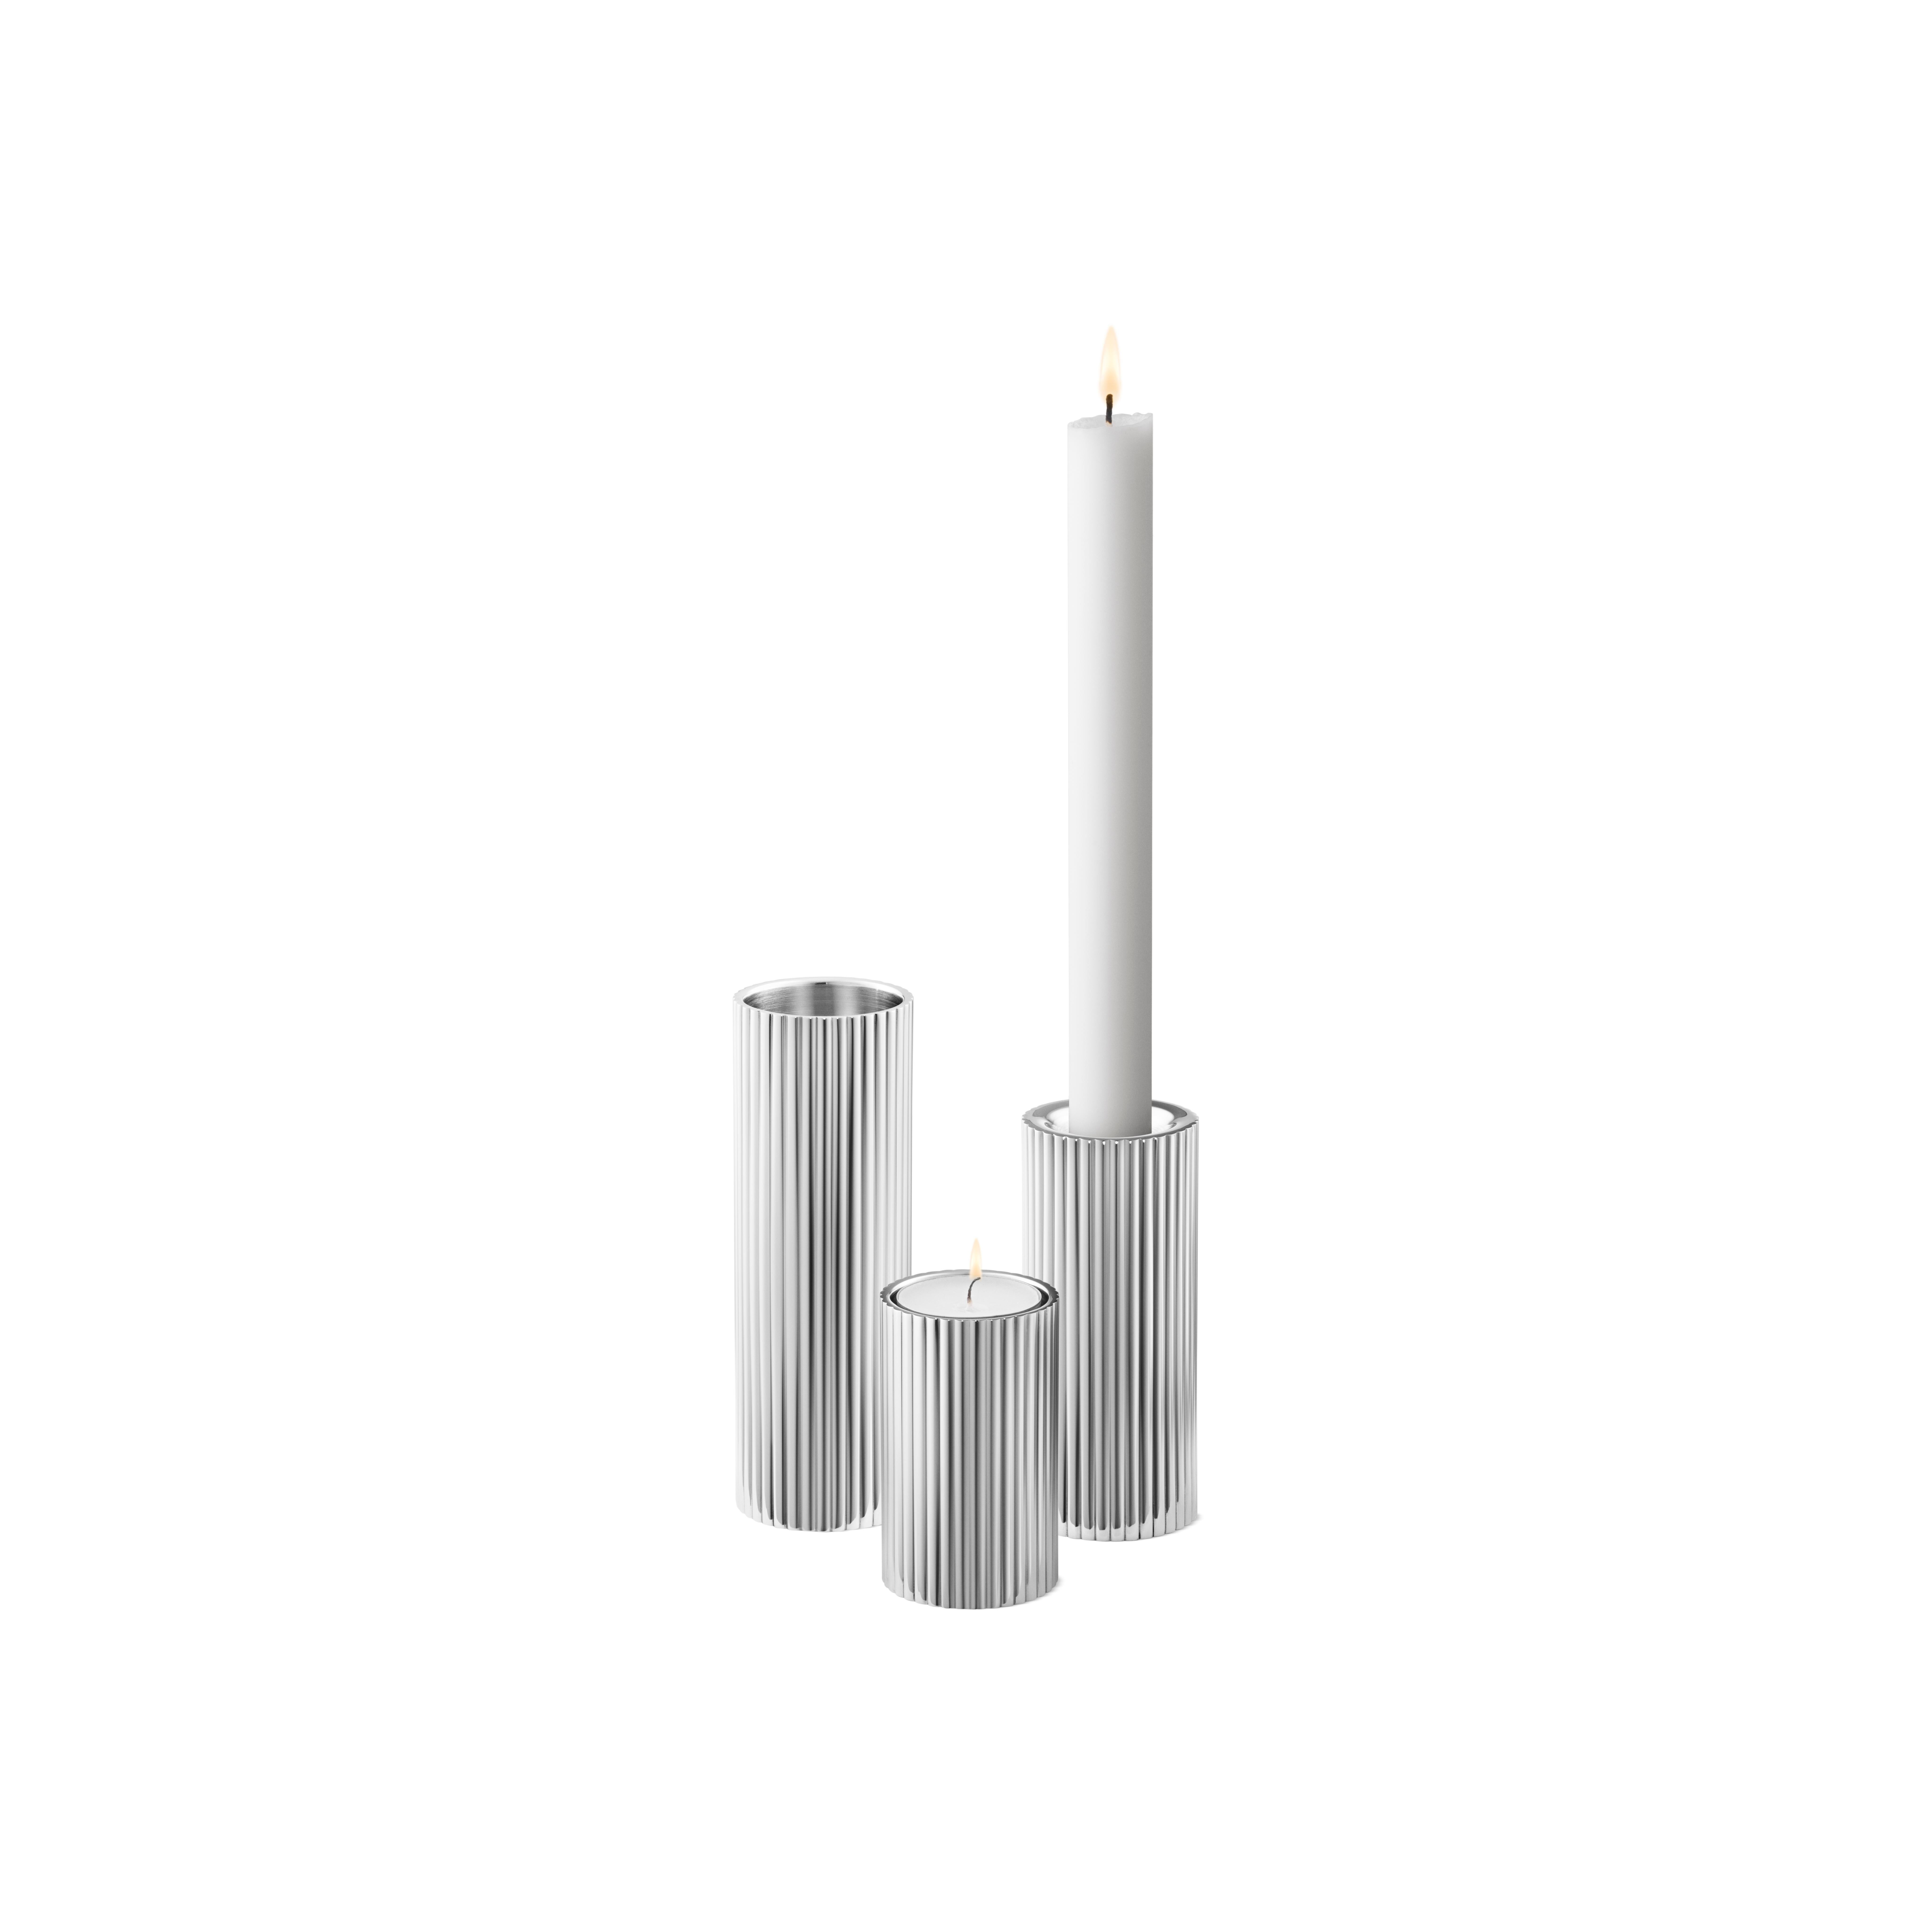 Bringing together both modernist looks and a multifunctional versatility, this medium sized Art Deco candleholder looks beautiful with a taper candle or tea-light when turned upside down. Standing alone on a windowsill or grouped with others of